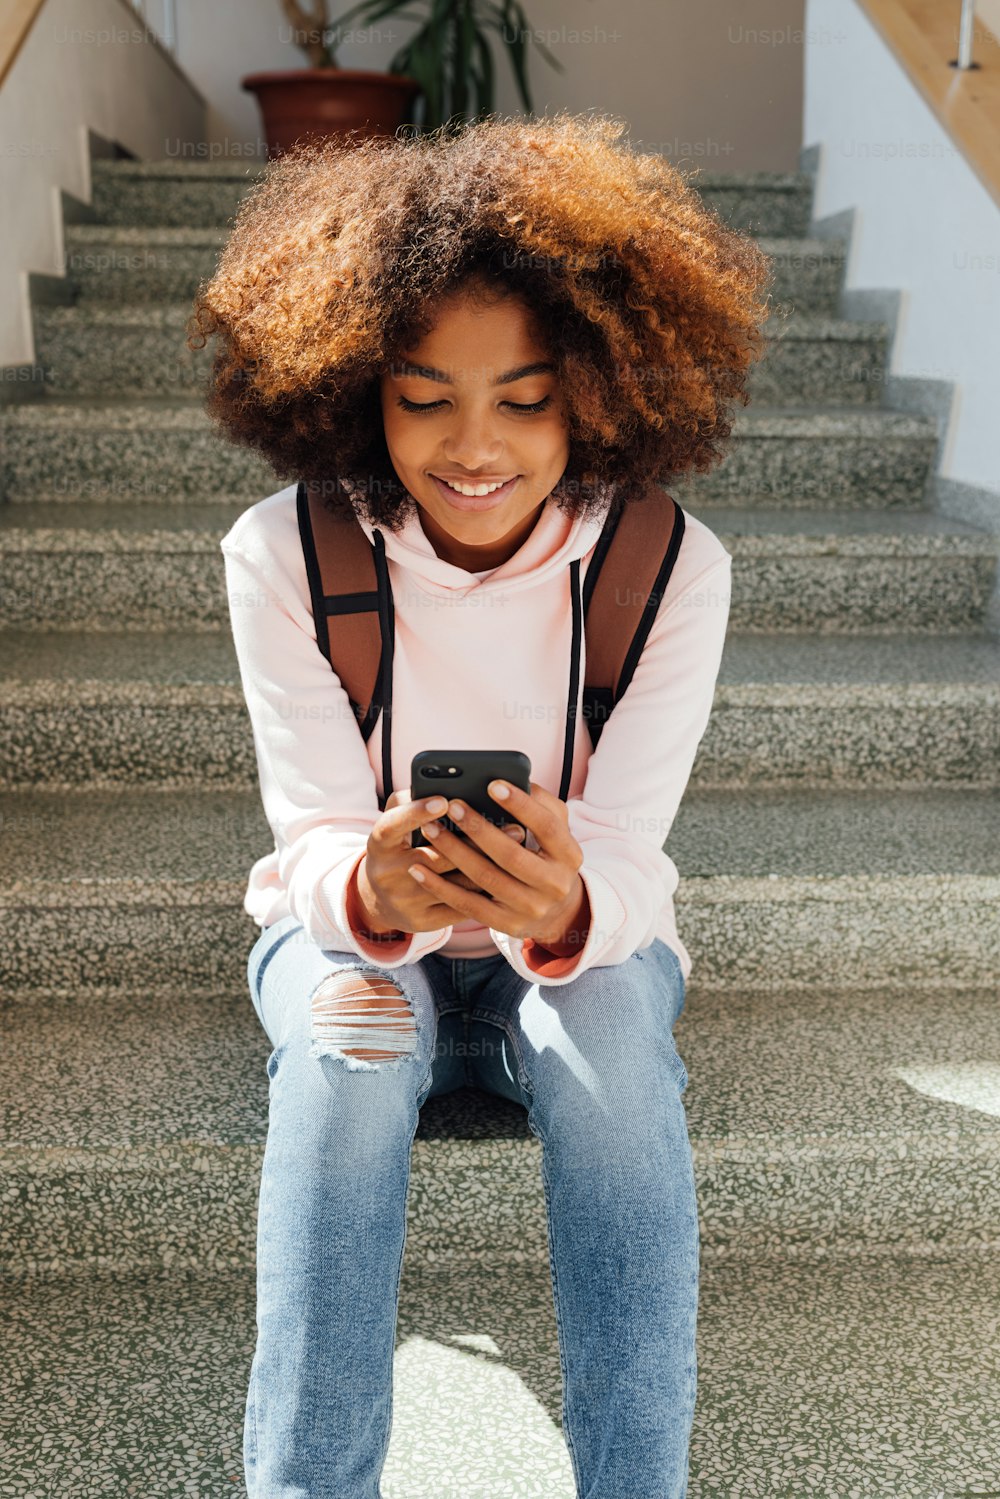 Smiling girl sitting on stairs in school and using smartphone